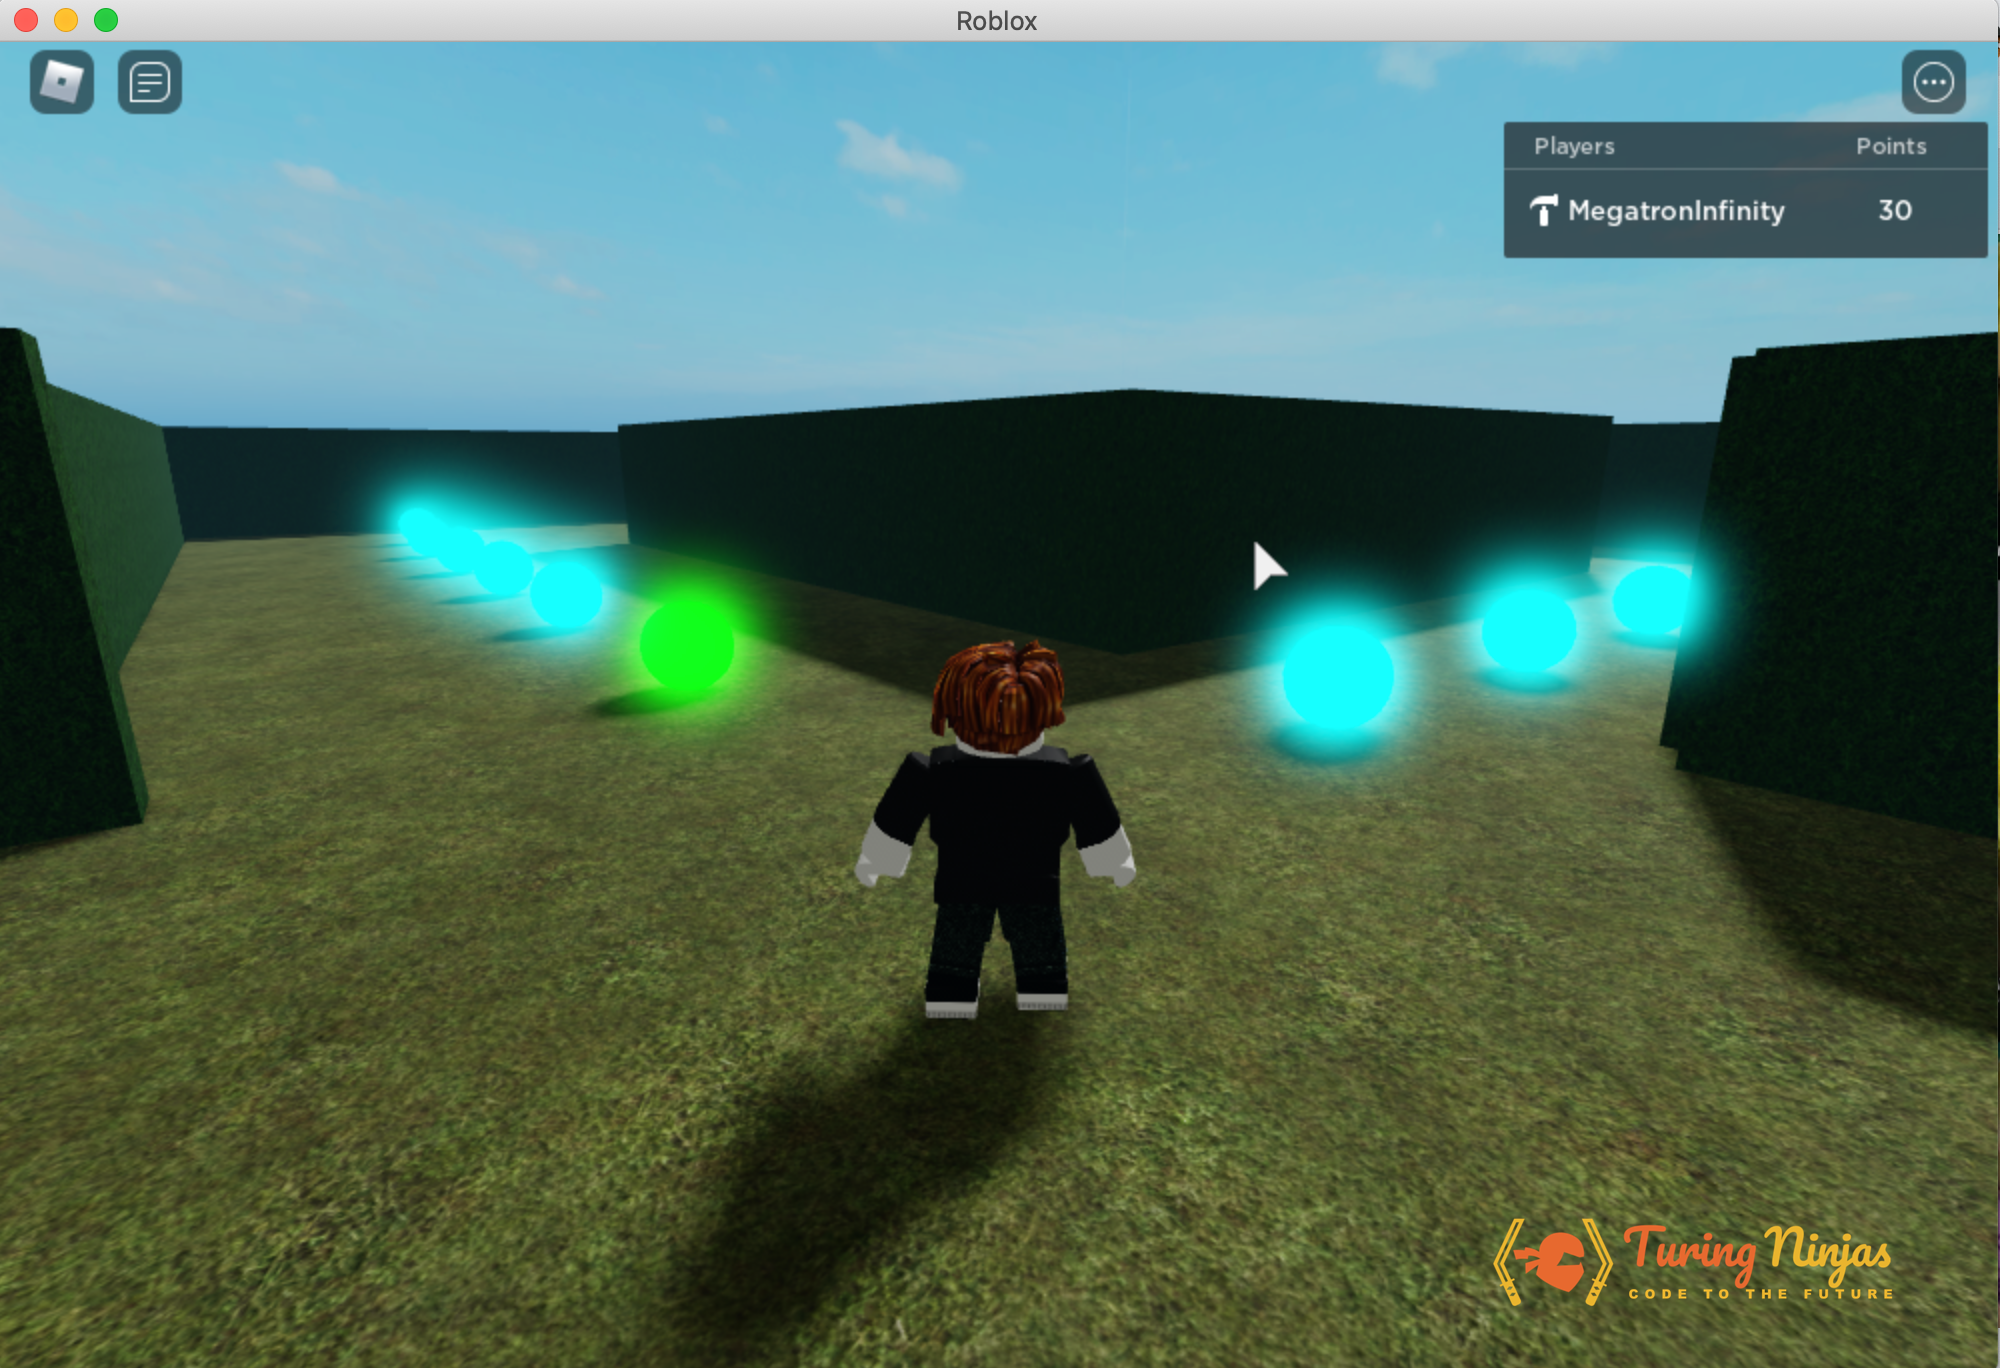 How To Develop Your Child S Creativity In A Fun Filled Way Roblox By Turing Ninjas Oct 2020 Medium - what coding language does roblox use